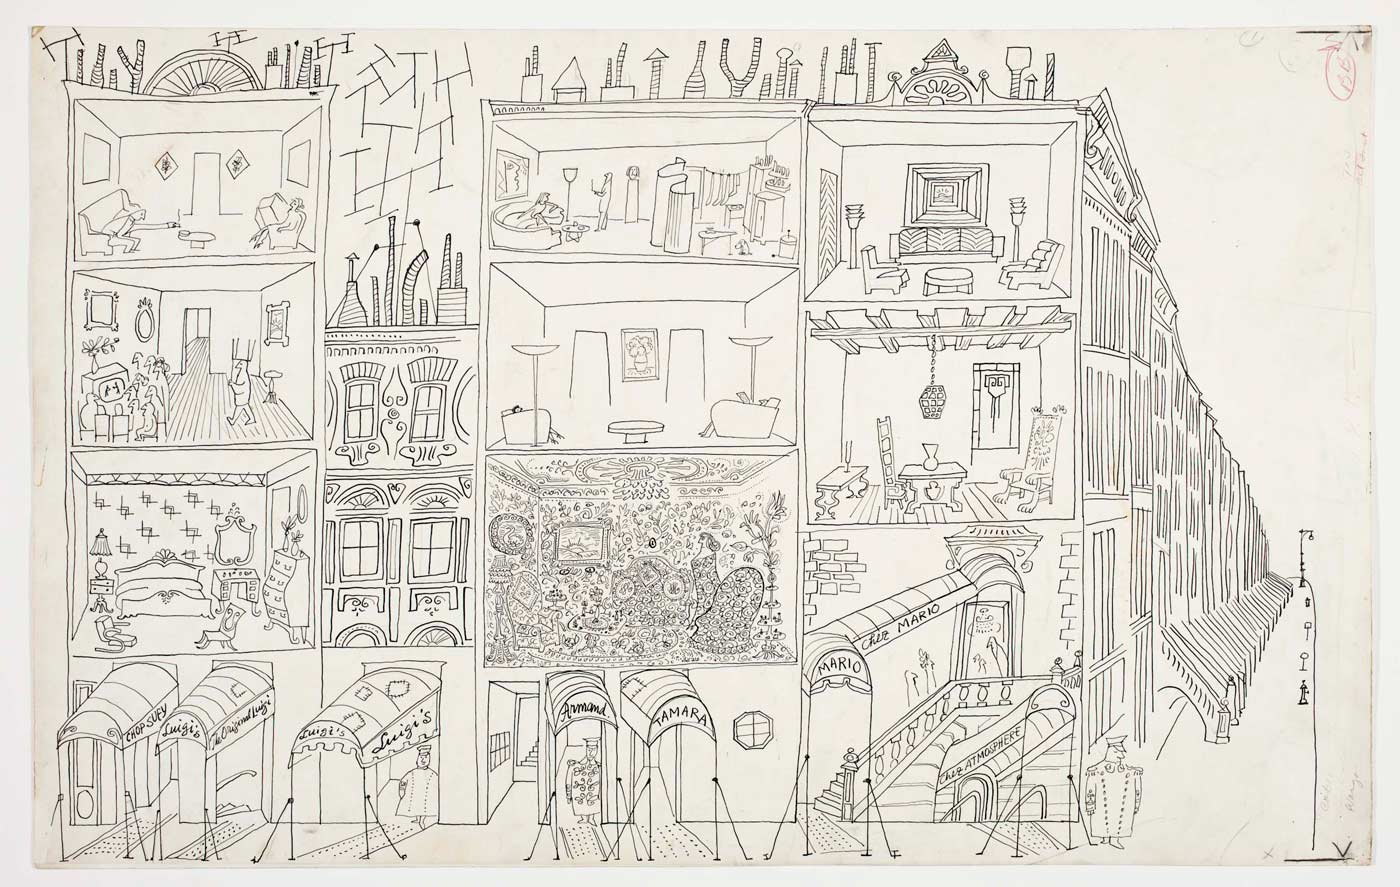 One of Steinberg’s drawings for his mural of Detroit at “An Exhibition for Modern Living,” Detroit Institute of Arts, 1949. Ink over pencil on paper, 14 5/8 x 23 1/8 in. Detroit Institute of Arts; Gift of the J.L. Hudson Company.